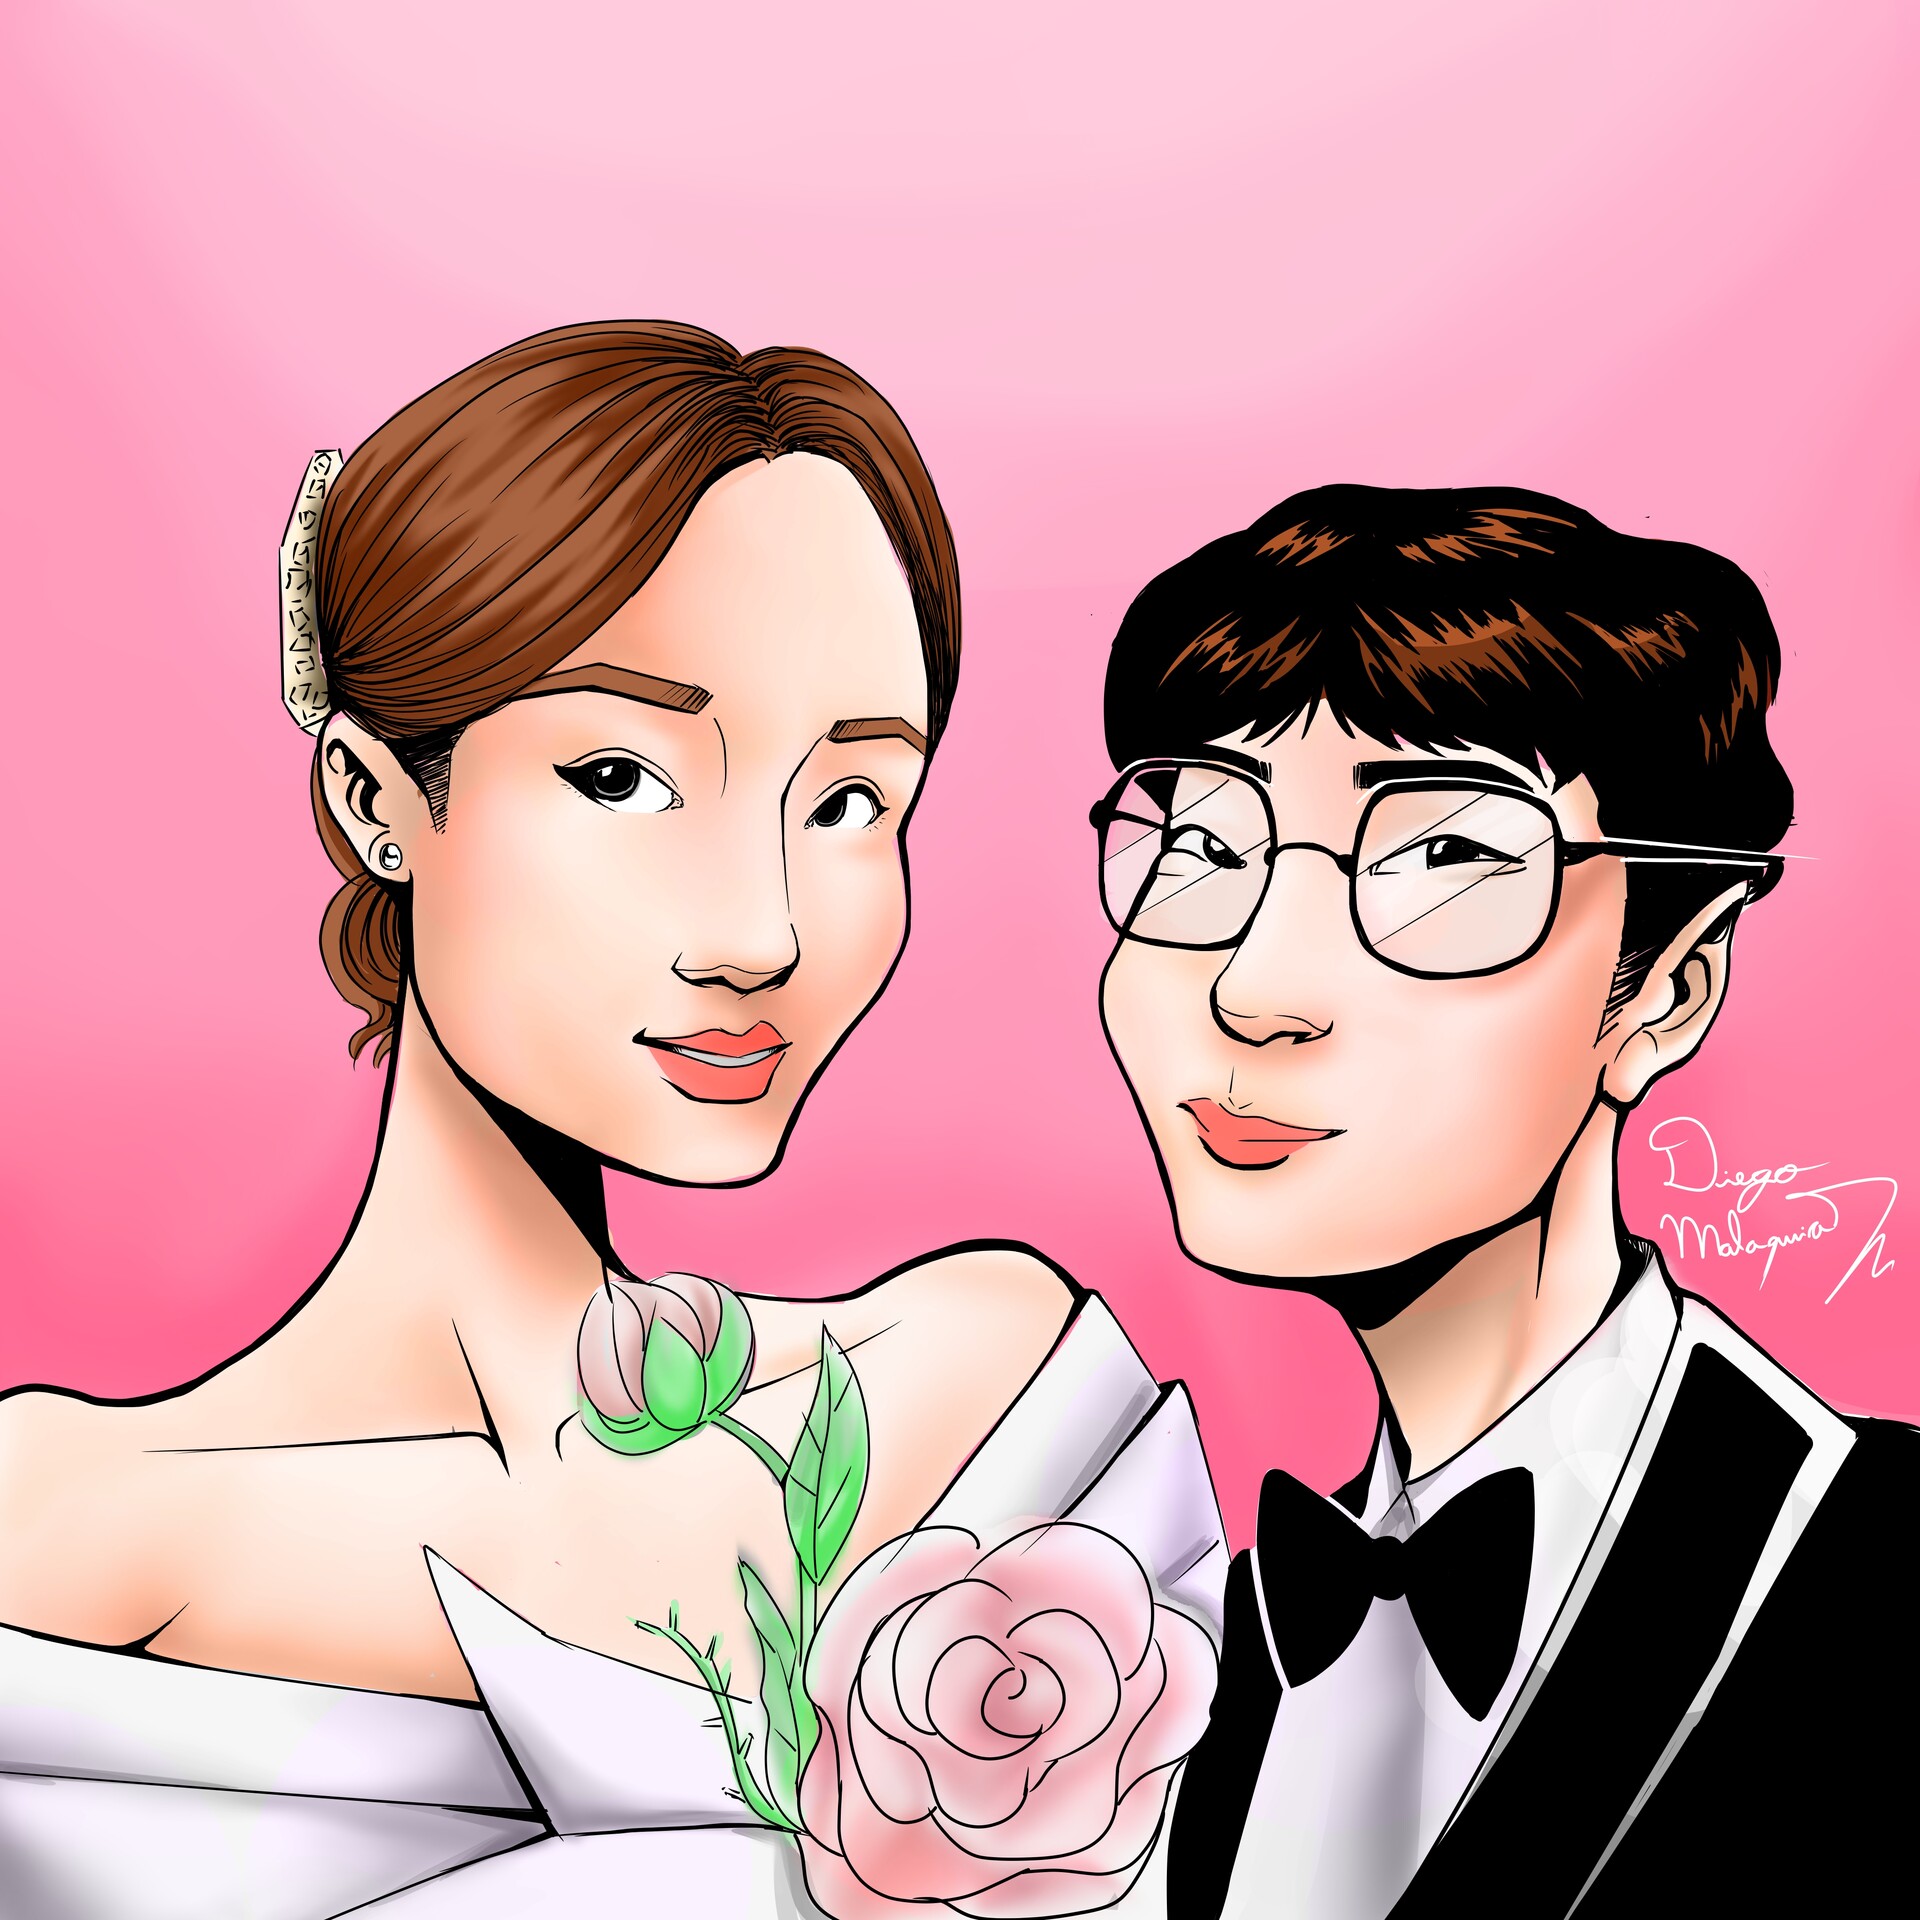 ArtStation - Caricature of the couple Jeong Jin-hwan and yeo ha-yeong ...